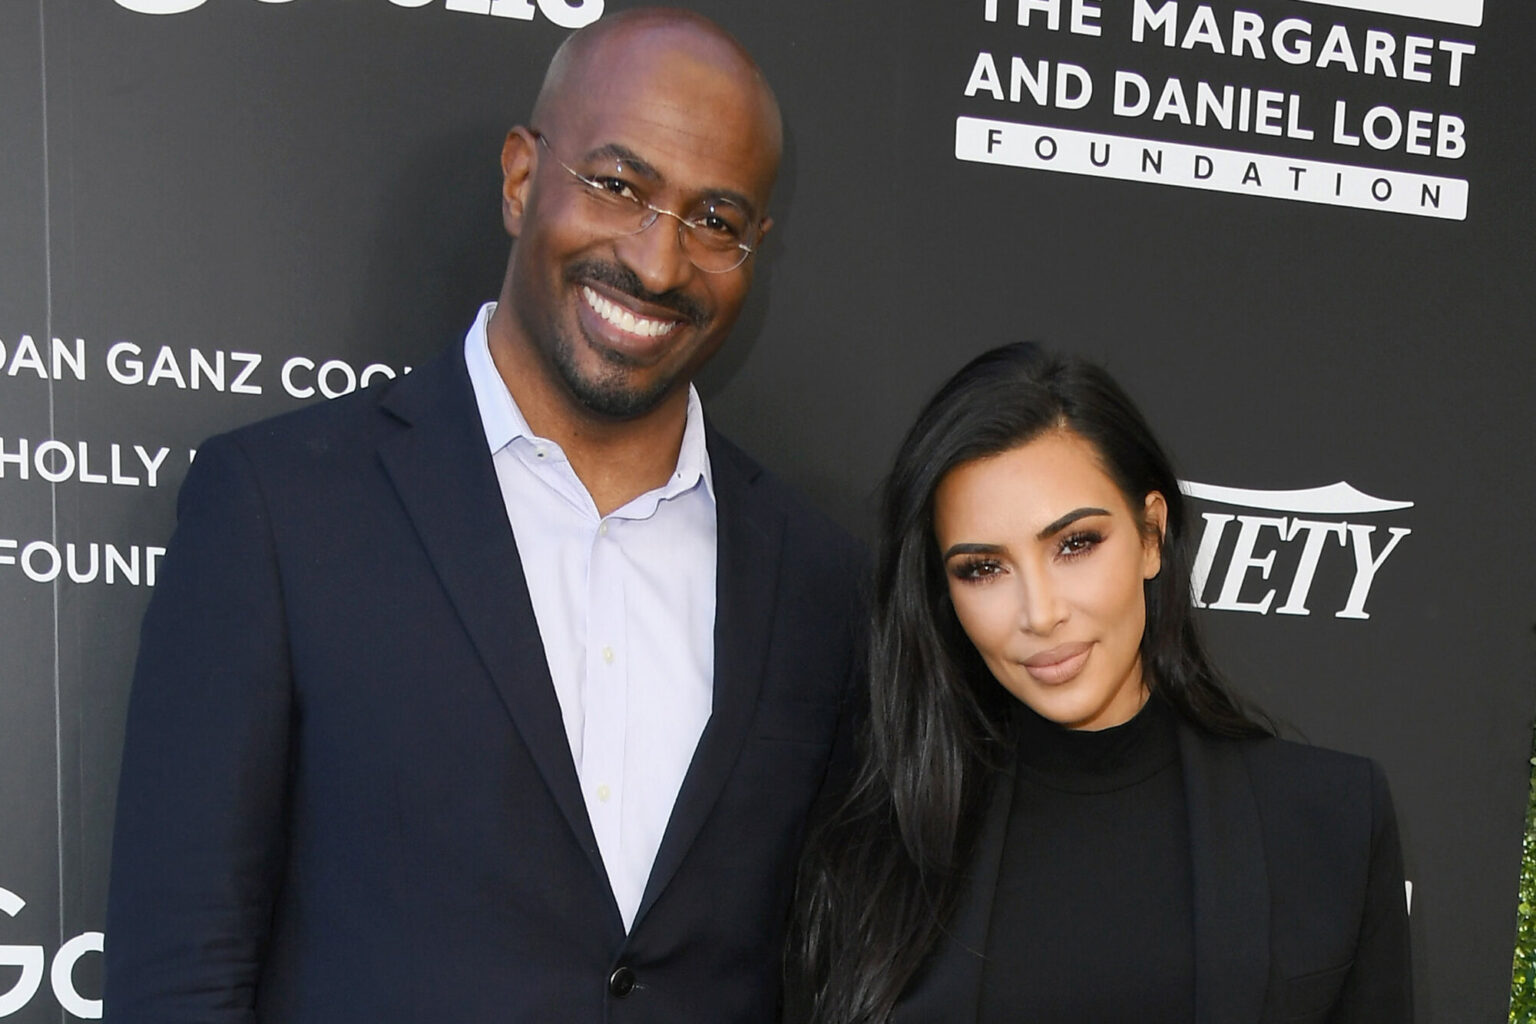 We're sure you've heard of Van Jones from CNN. Could it be that the news anchor is head over heels for Kim Kardashian? Find out the gossip here.